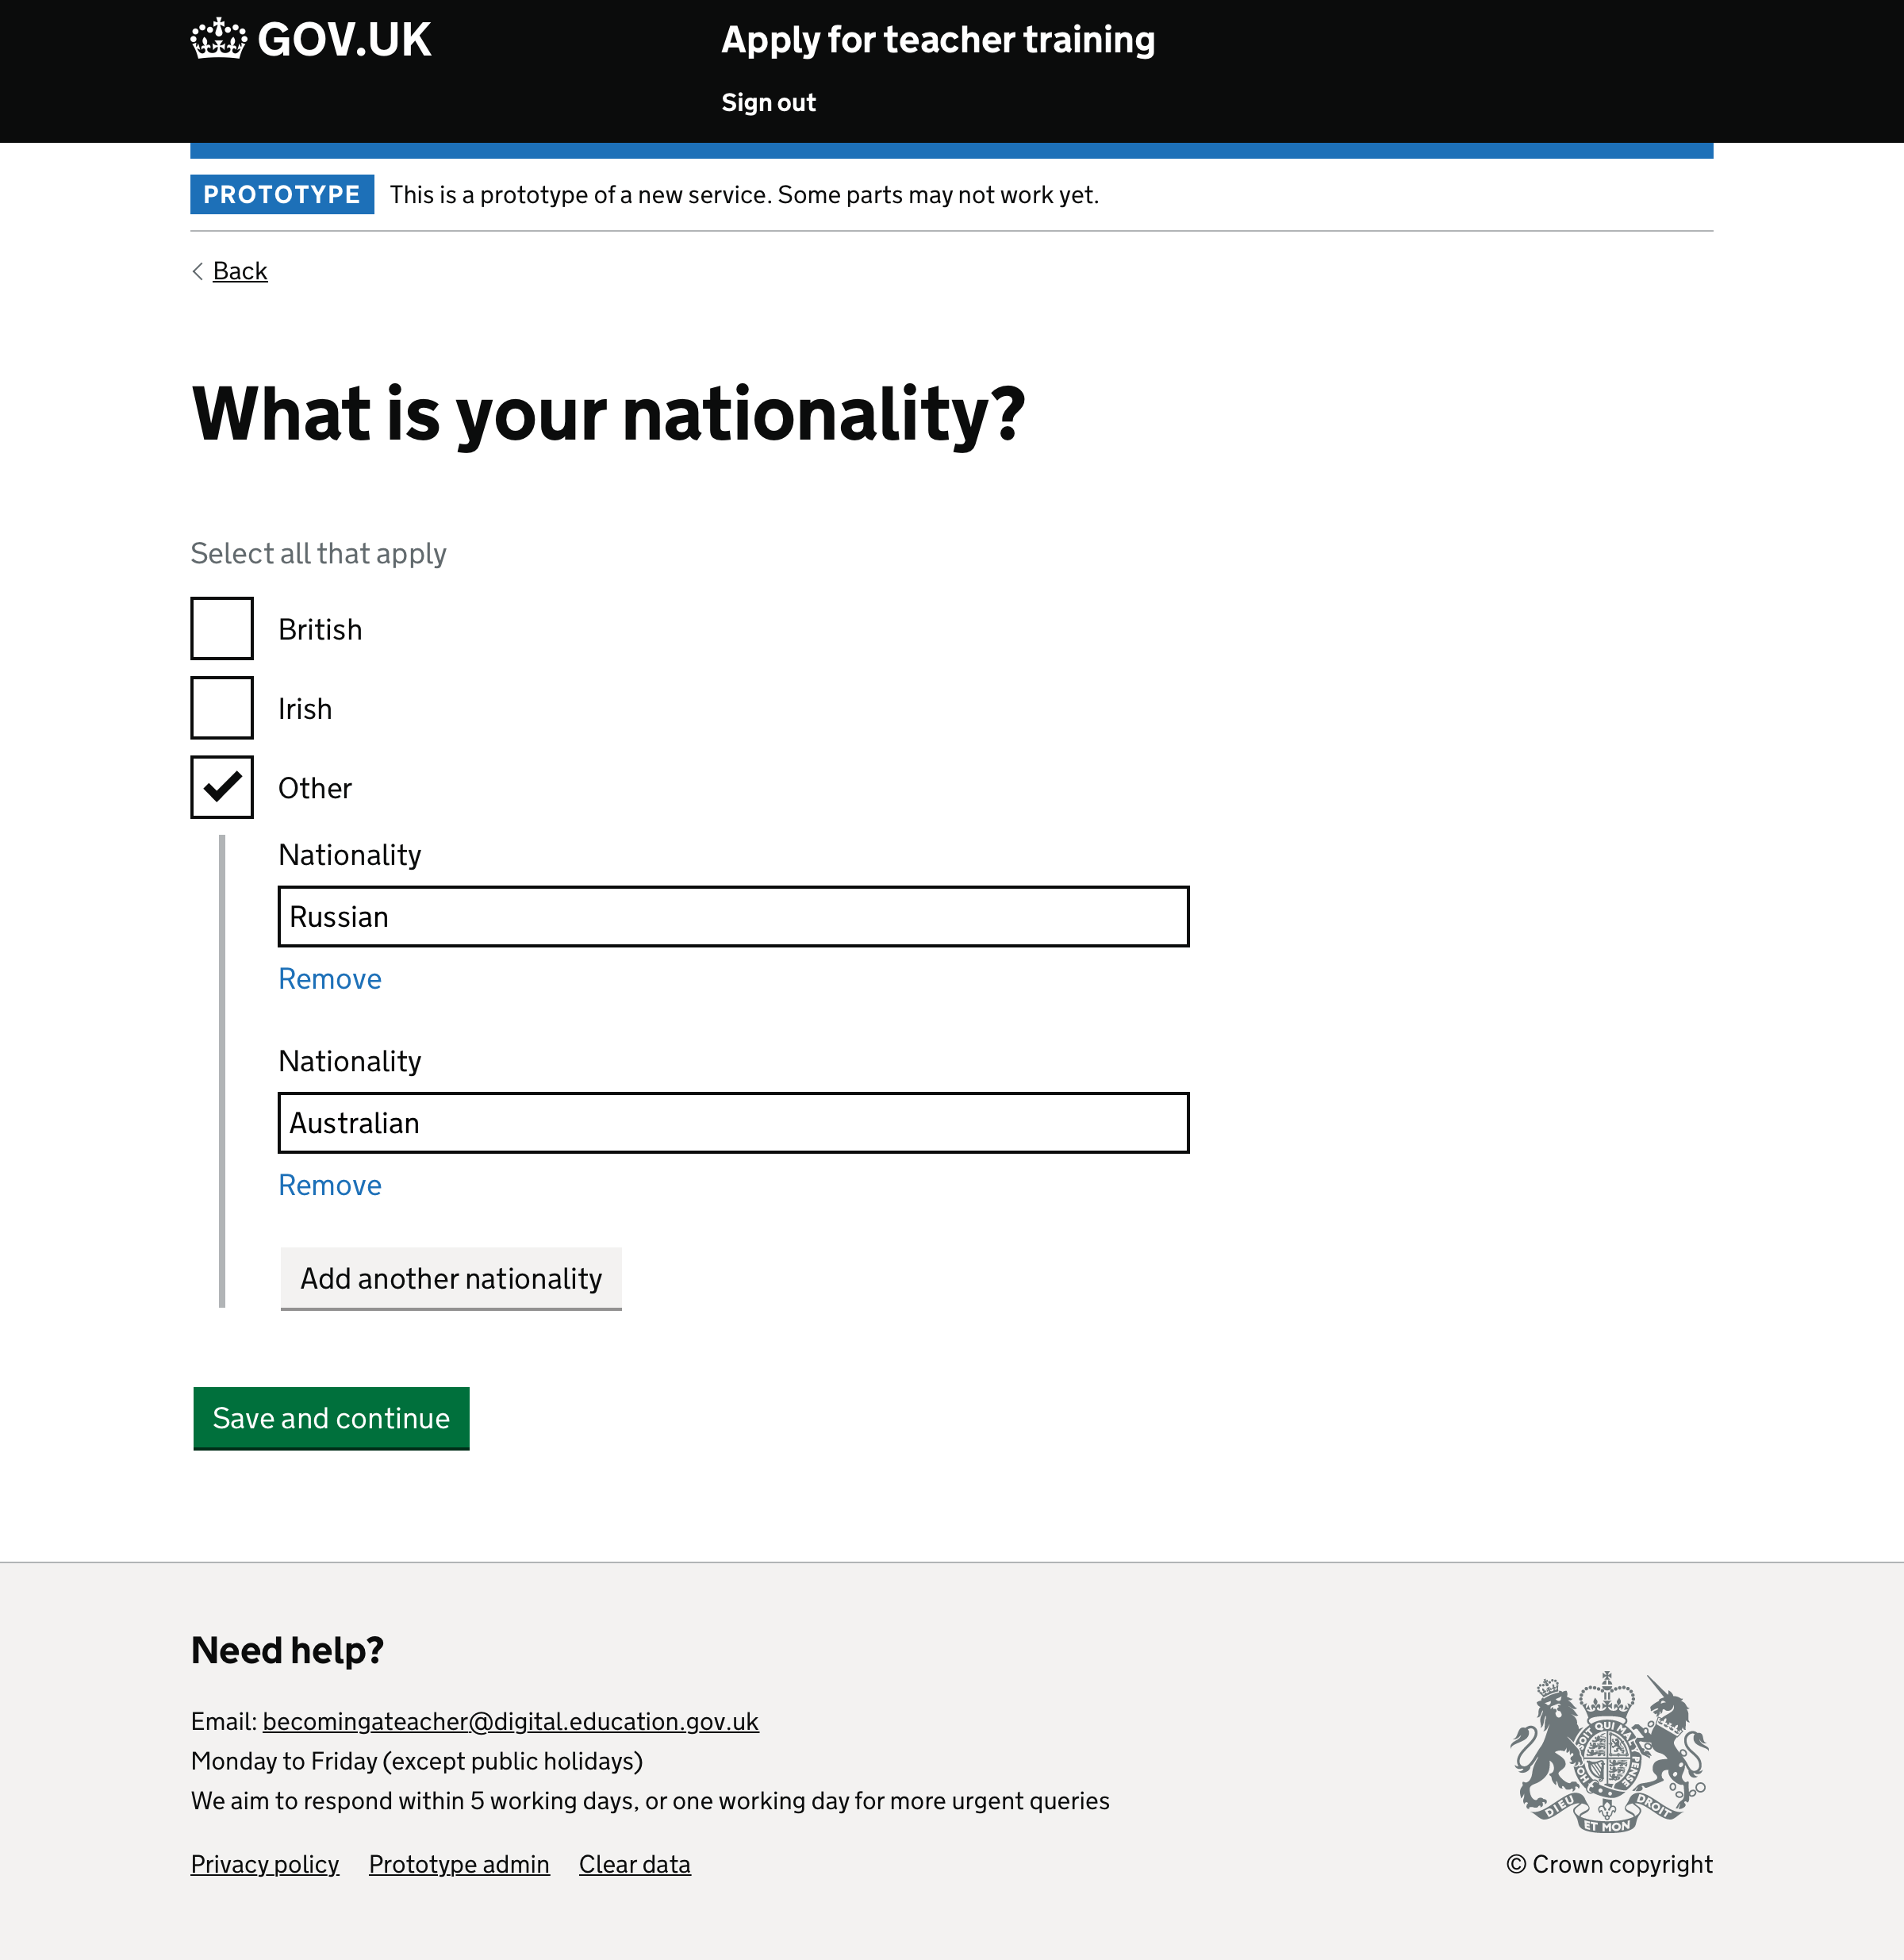 Nationality question showing ‘Other’ nationality field conditionally shown.